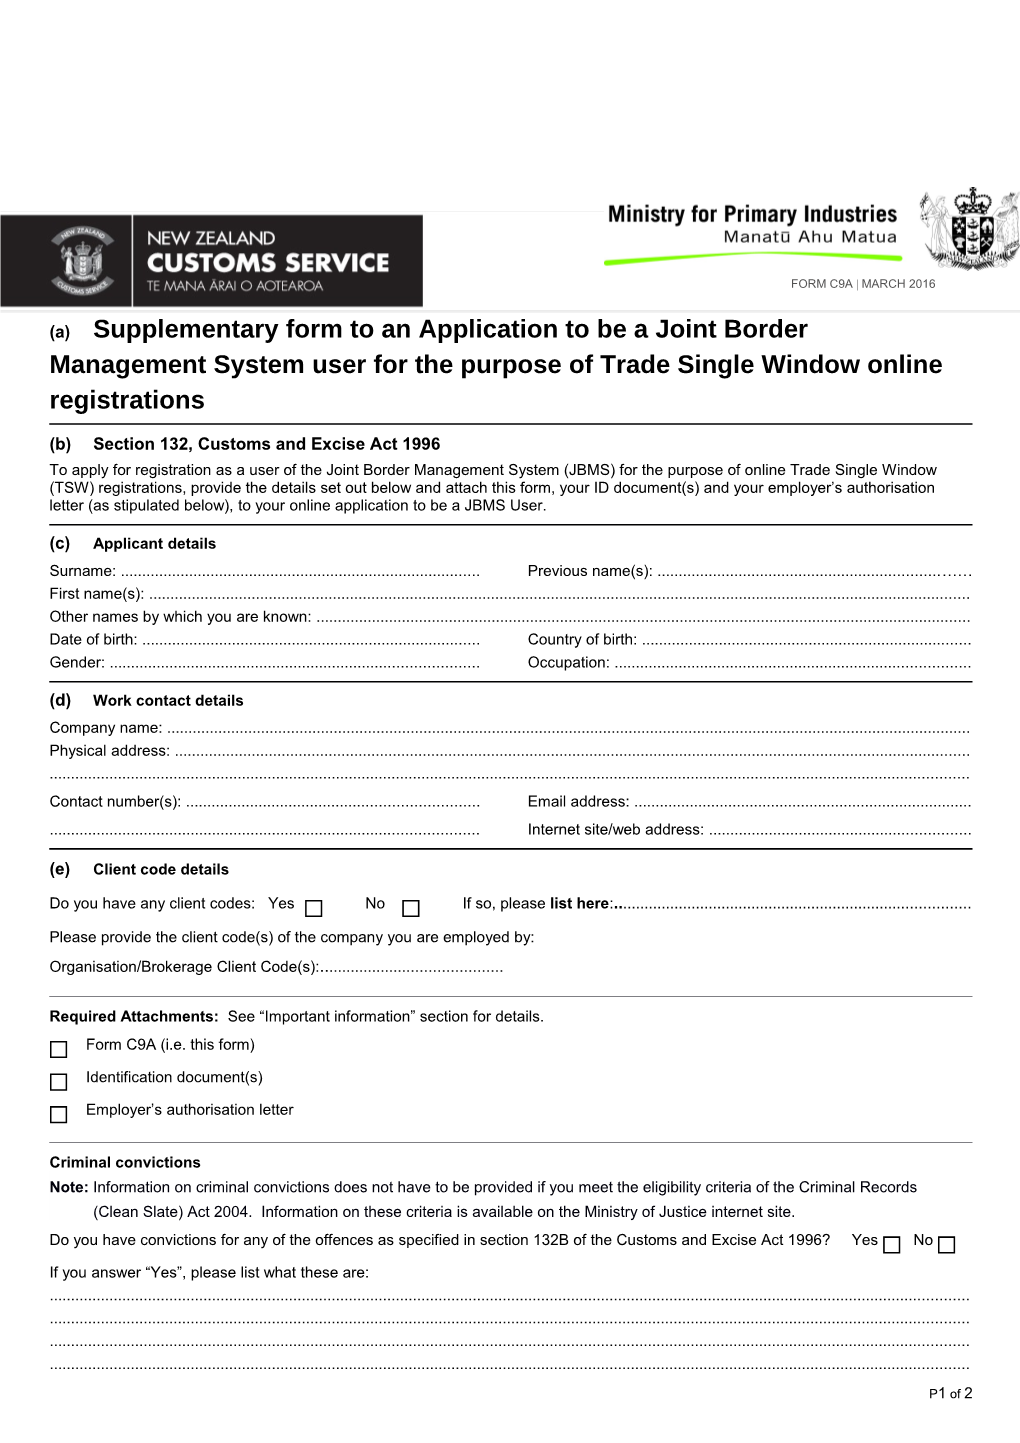 C9A - Supplementary Form to an Application to Be a JBMS User for the Purpose of TSW Online